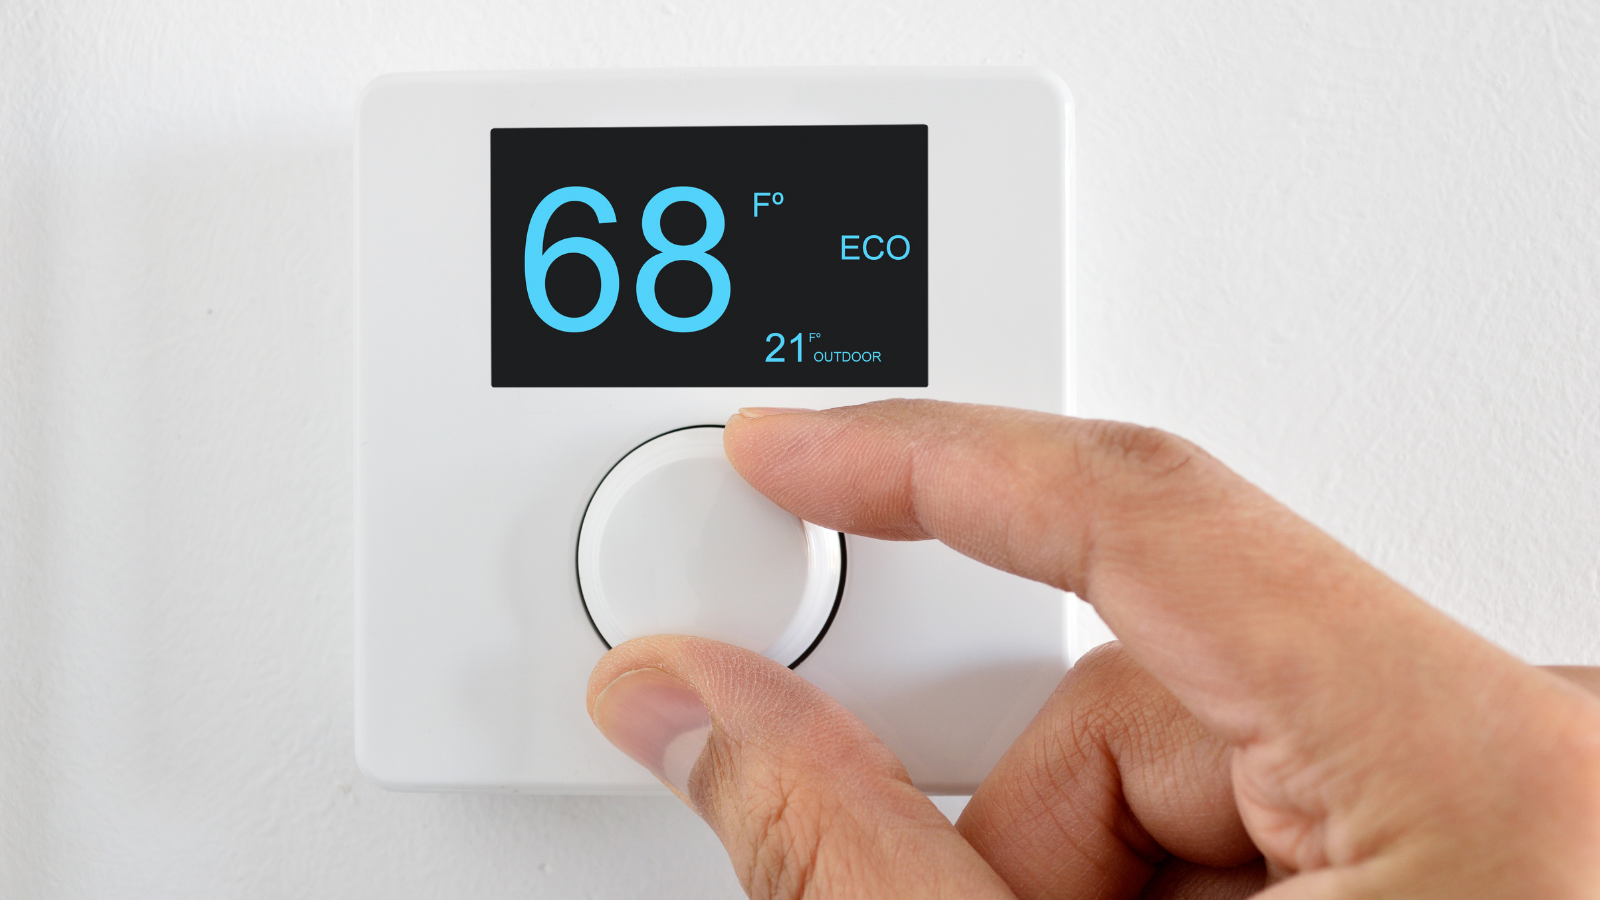 you can save up to 10% a year on your heating and cooling when you set back the thermostat 7-10 degrees from your typical setting for 8 hours a day.